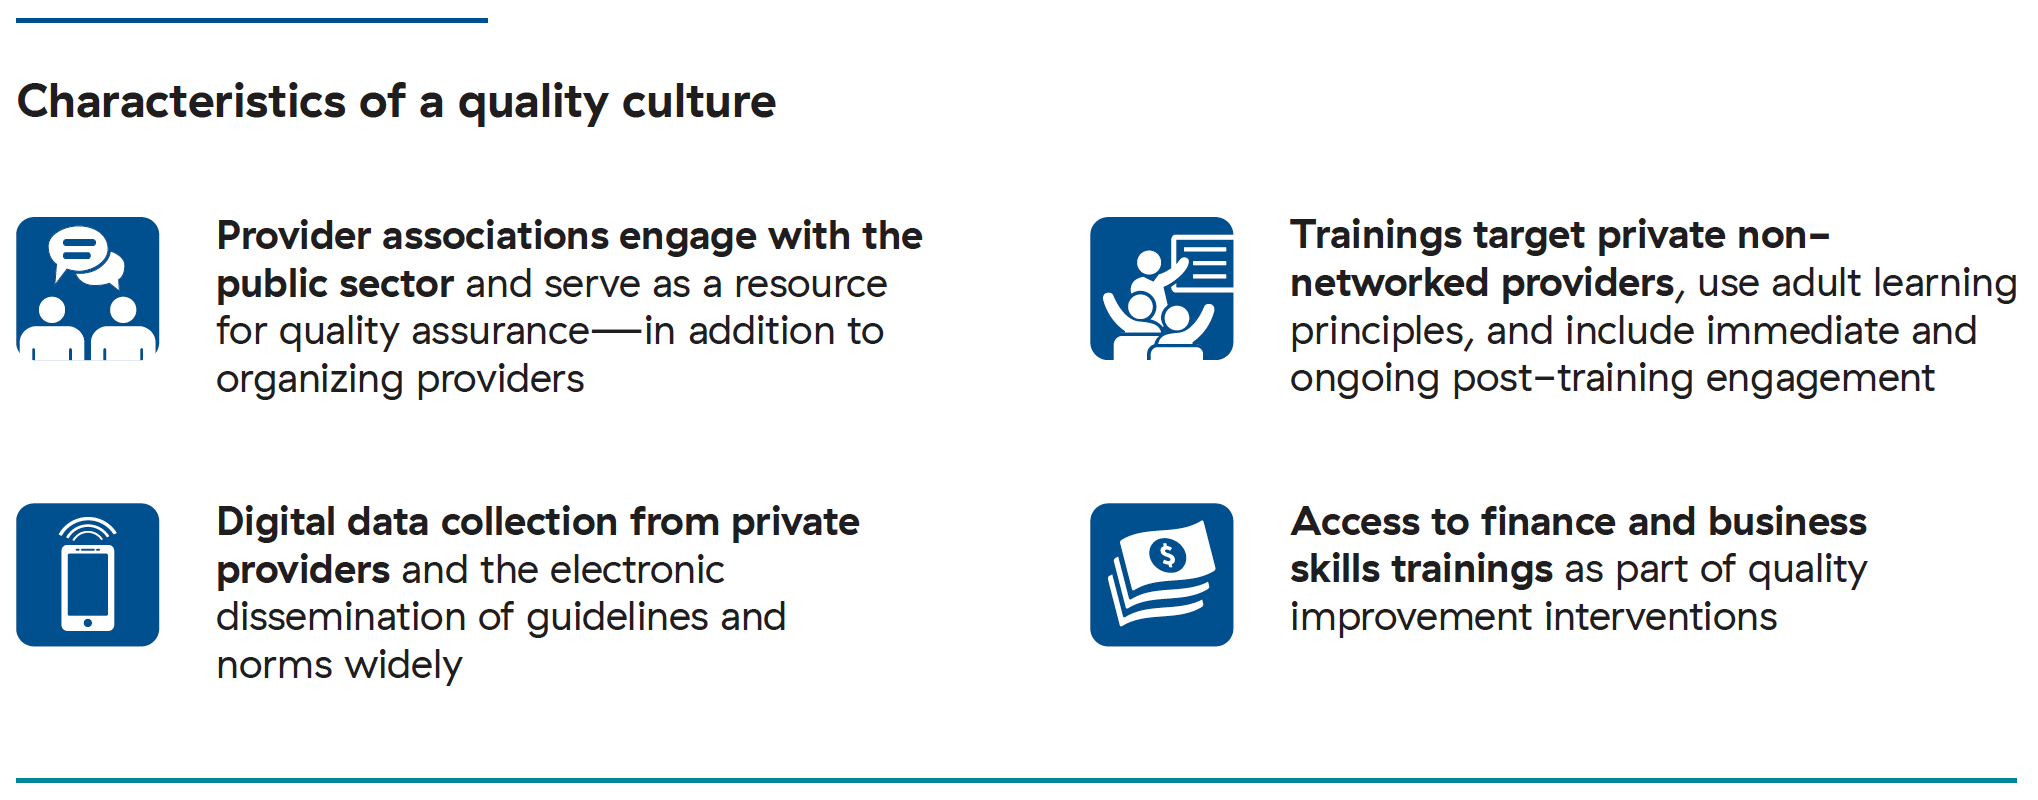 Infographic titled, Characteristics of a quality culture. Provider associations engage with the public sector and serve as a resource for quality assurance—in addition to organizing providers. Trainings target private non-networked providers, use adult learning principles, and include immediate and ongoing post-training engagement. Digital data collection from private providers and the electronic dissemination of guidelines and norms widely. Access to finance and business skills trainings as part of quality improvement interventions